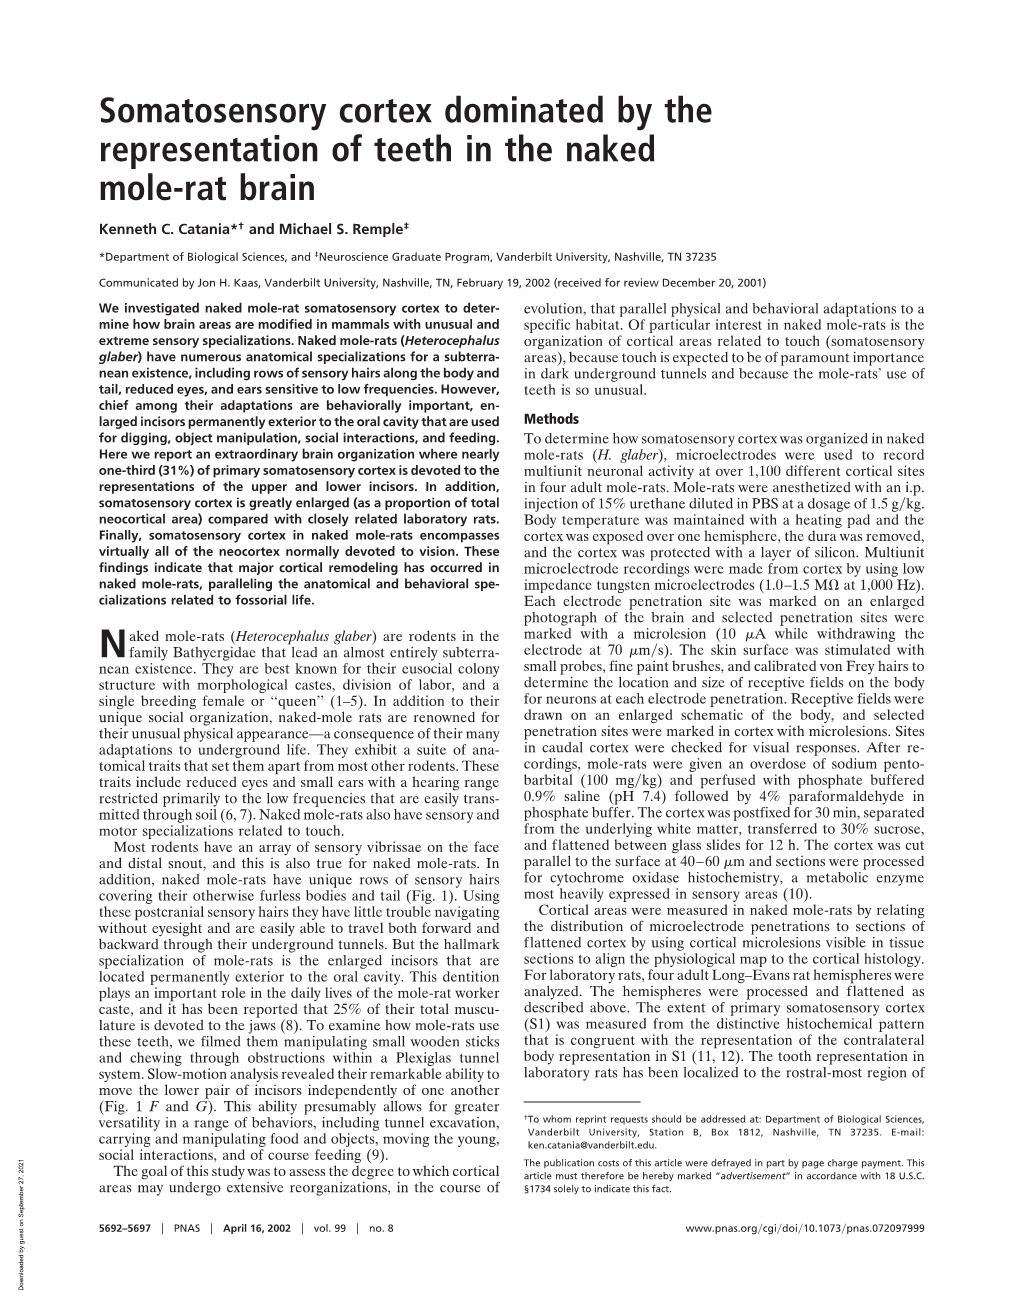 Somatosensory Cortex Dominated by the Representation of Teeth in the Naked Mole-Rat Brain